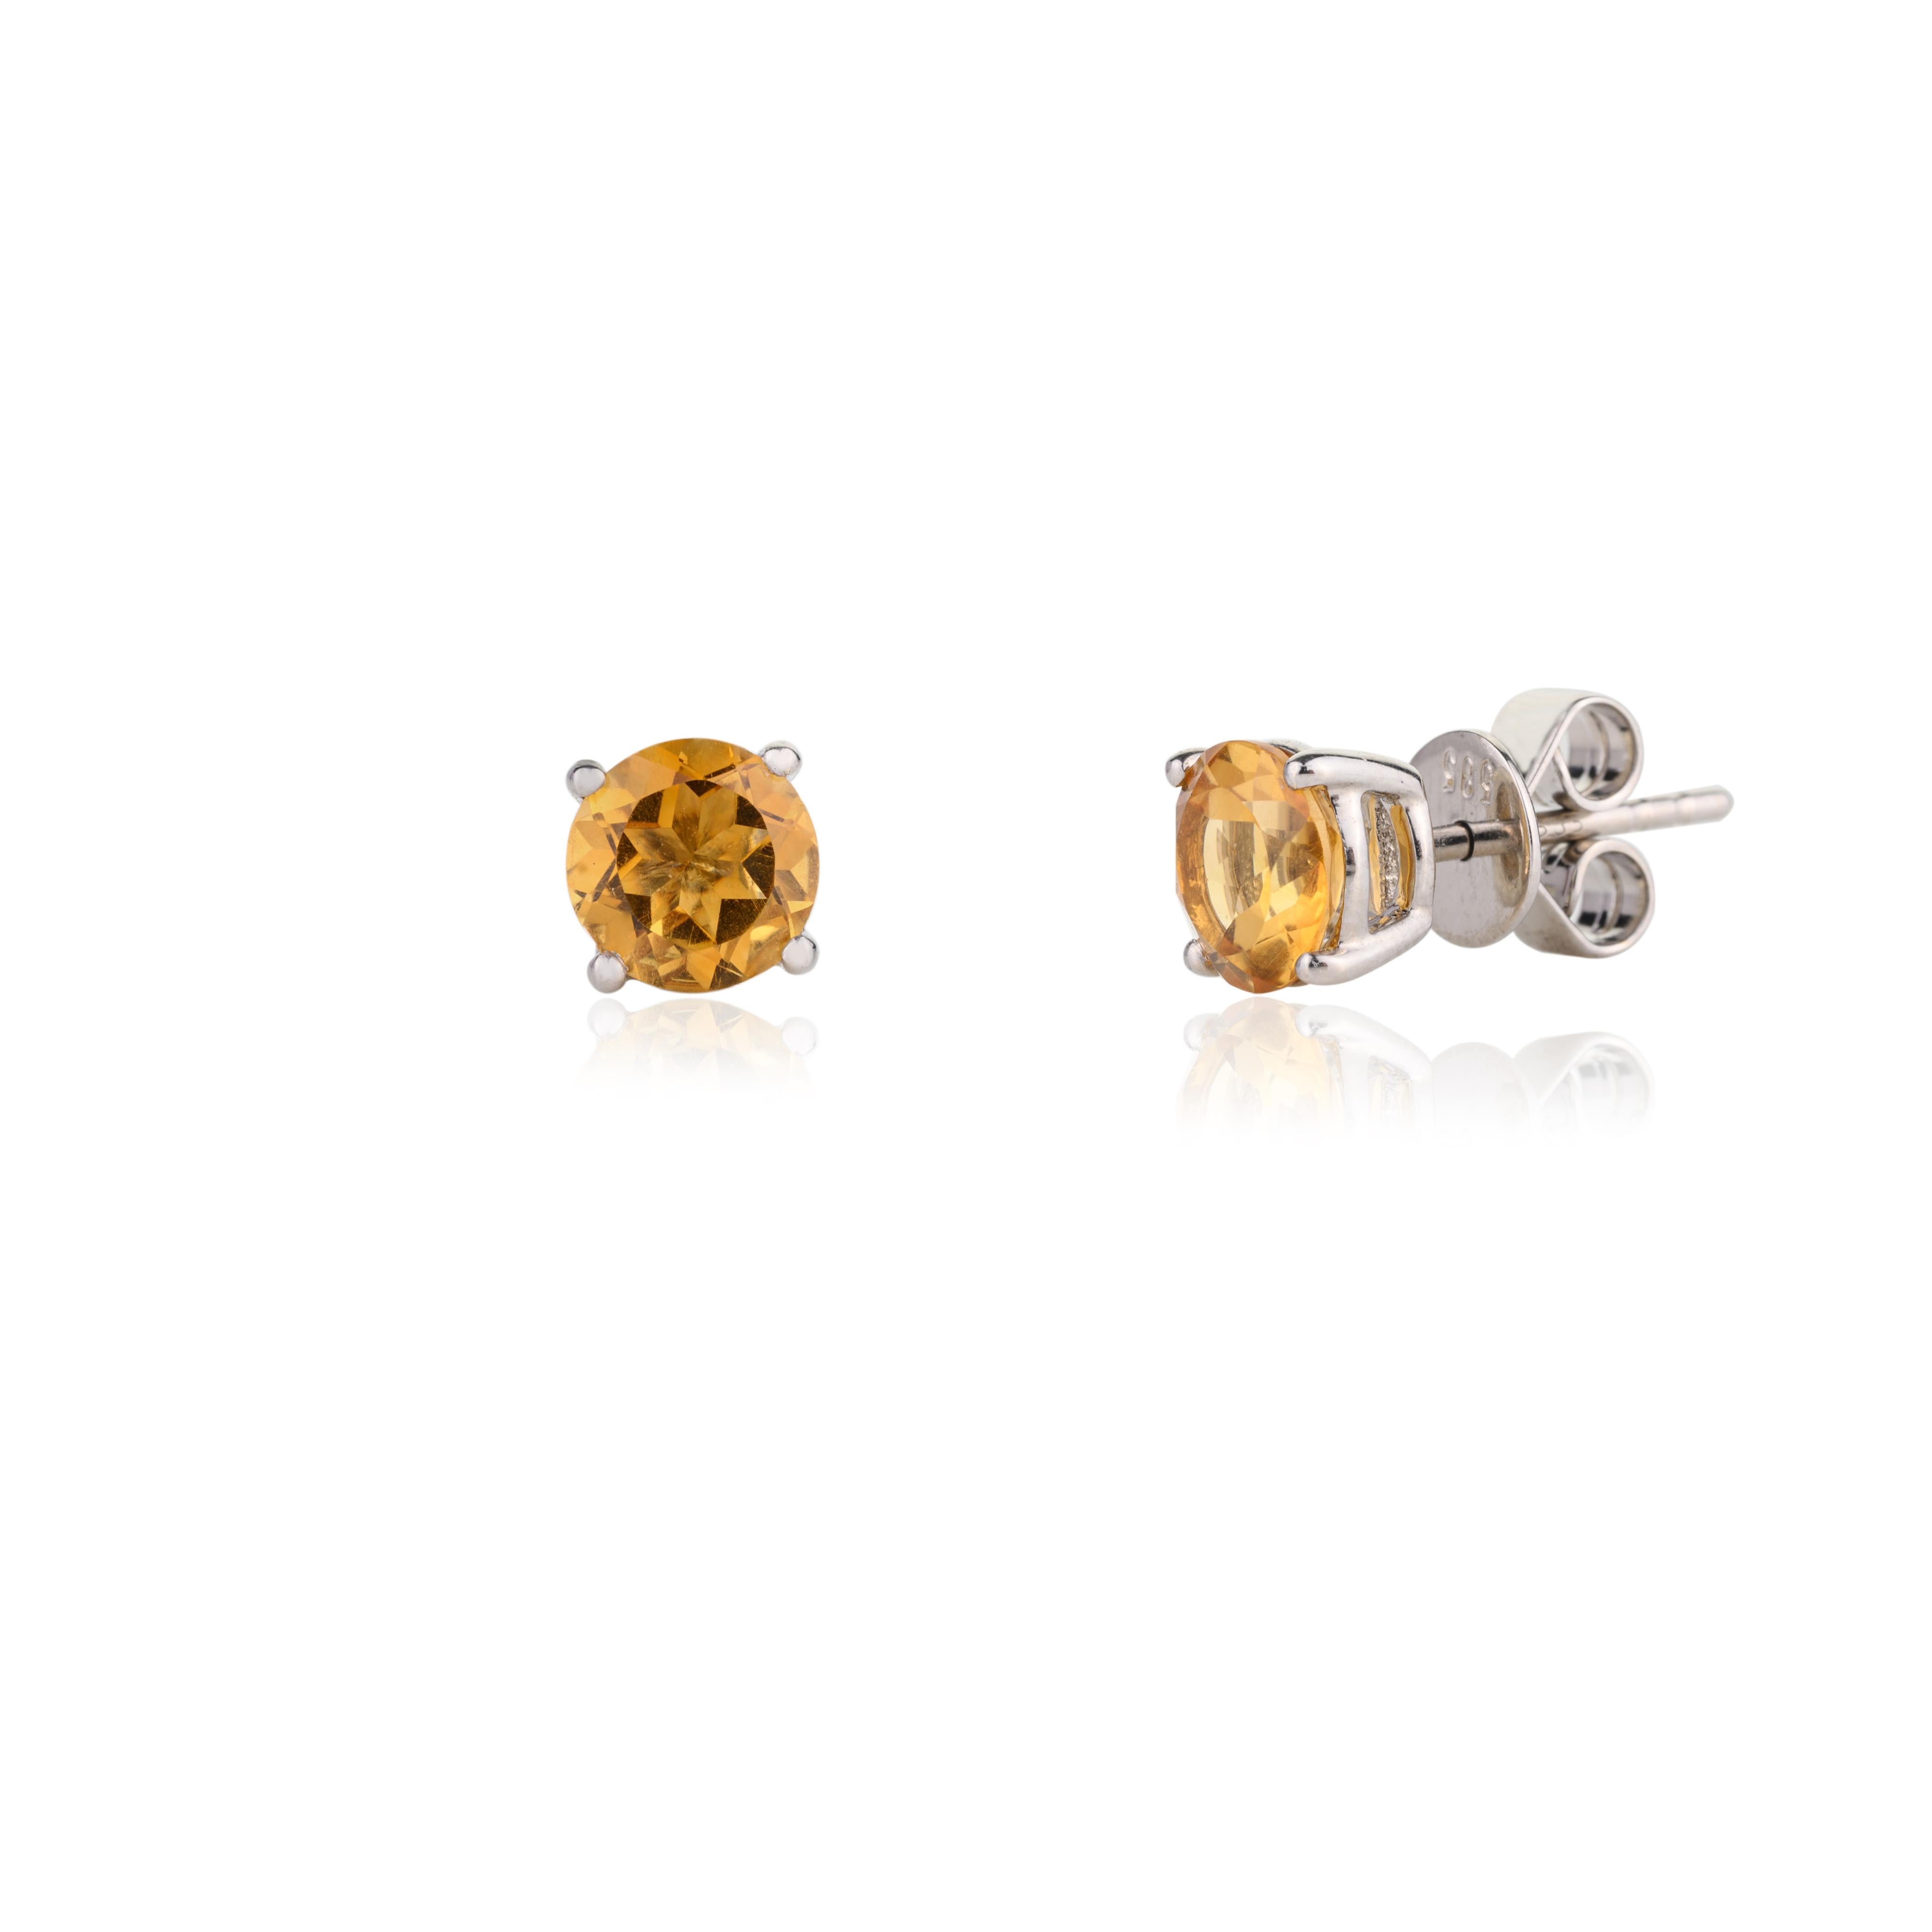 Modern Faceted Citrine Solitaire Stud Earrings in 14k White Gold Gift for Her For Sale